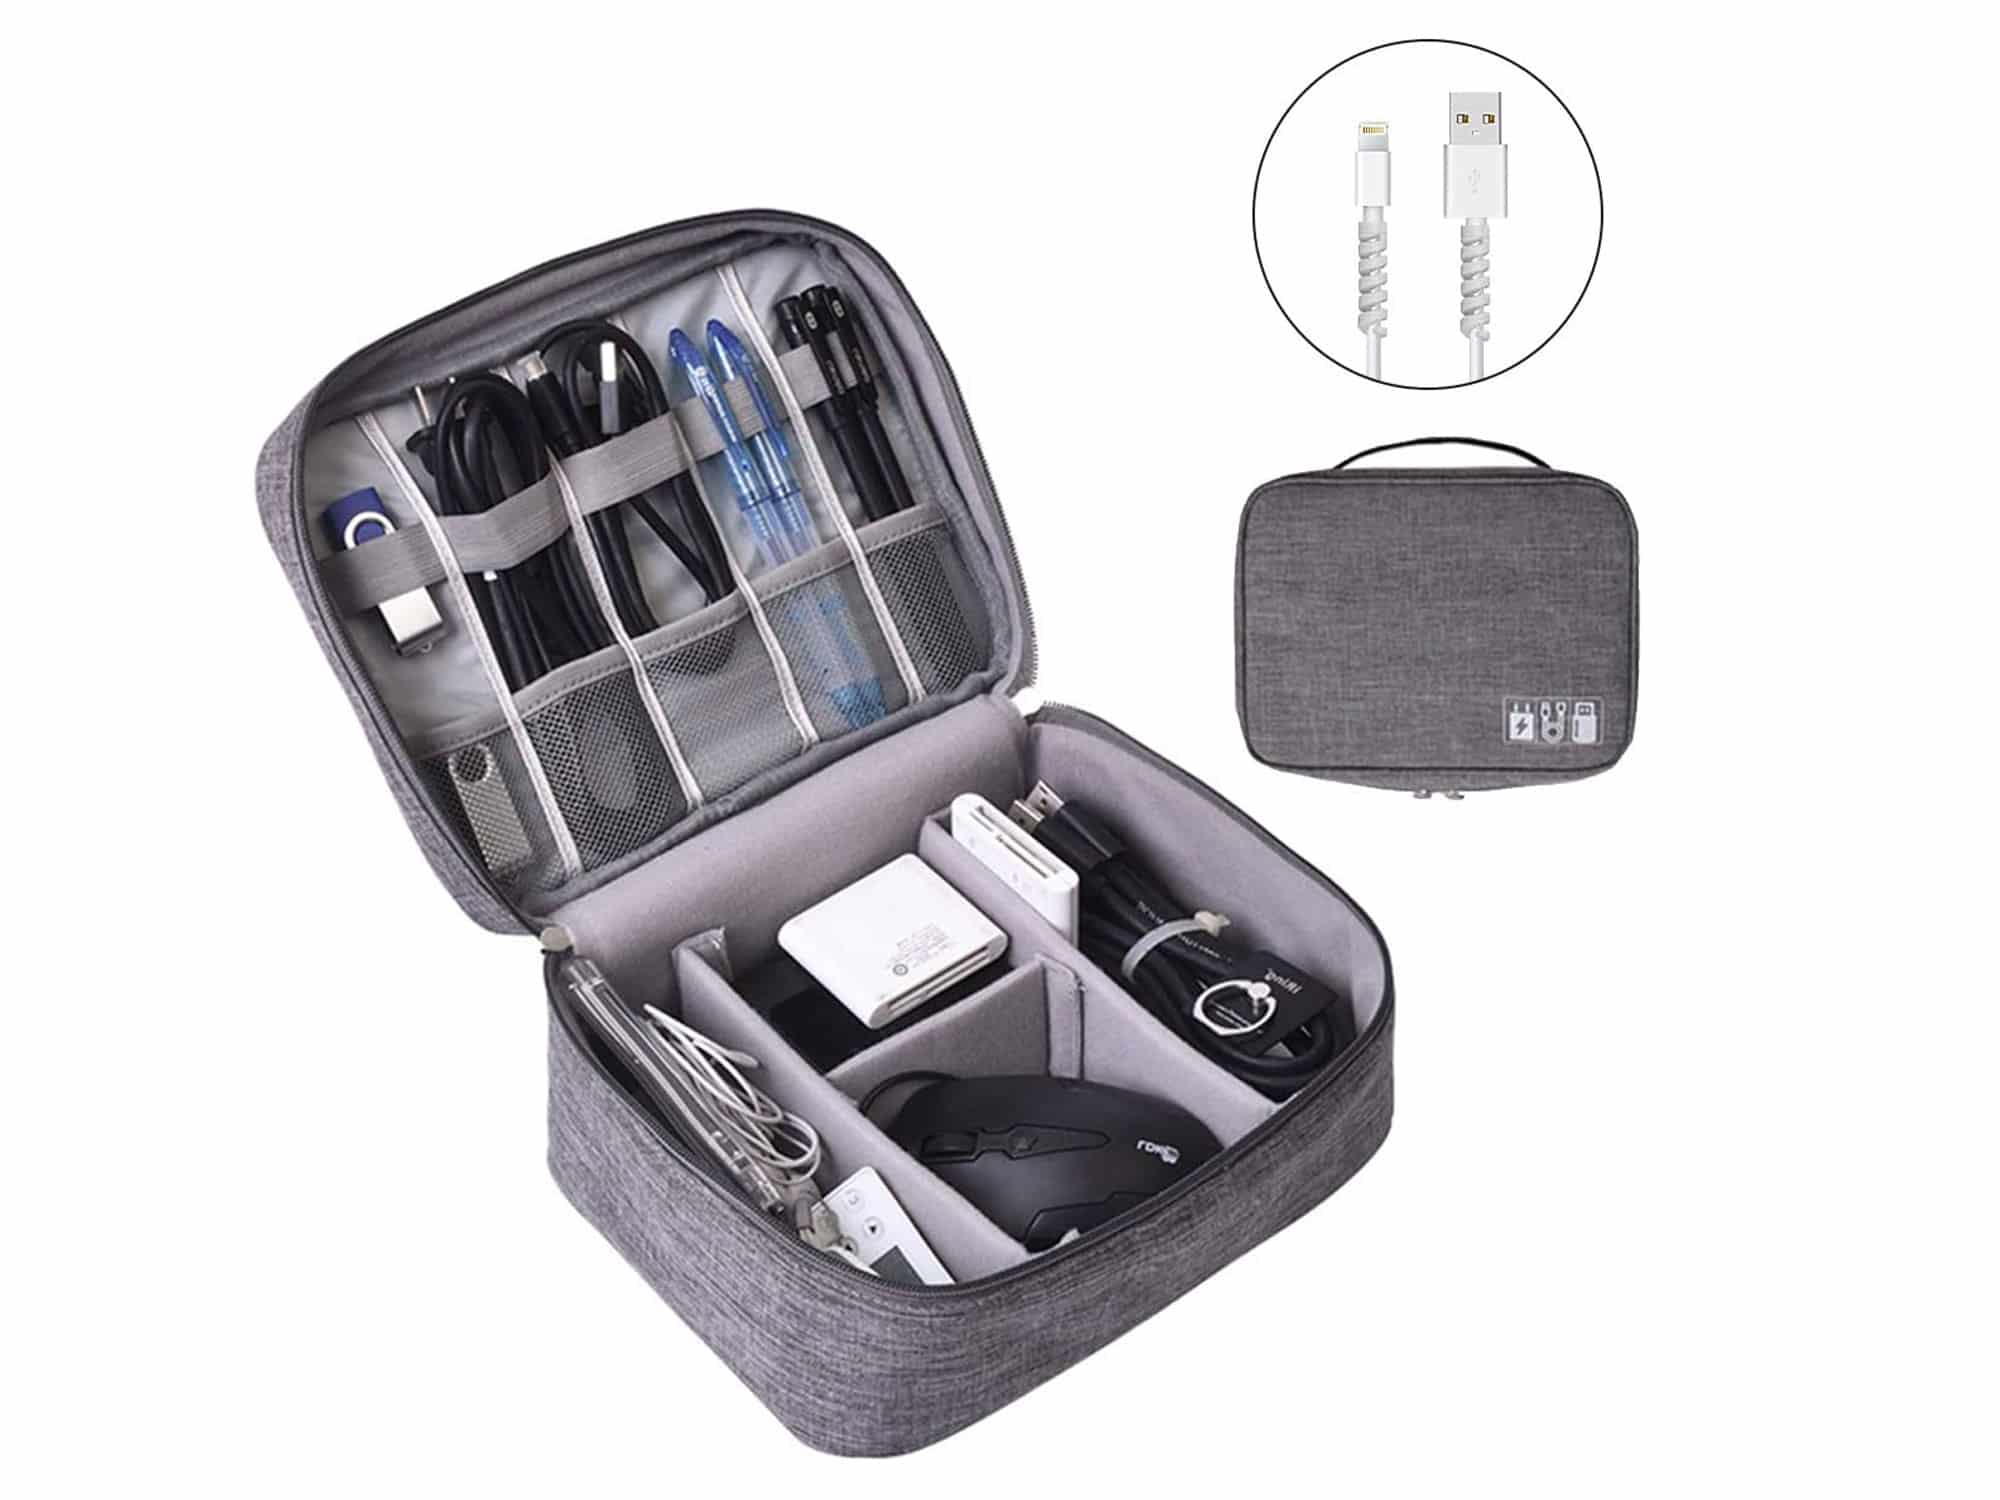 Electronics Organizer, OrgaWise Electronic Accessories Bag Travel Cable Organizer Three-Layer for iPad Mini, Kindle, Hard Drives, Cables, Chargers